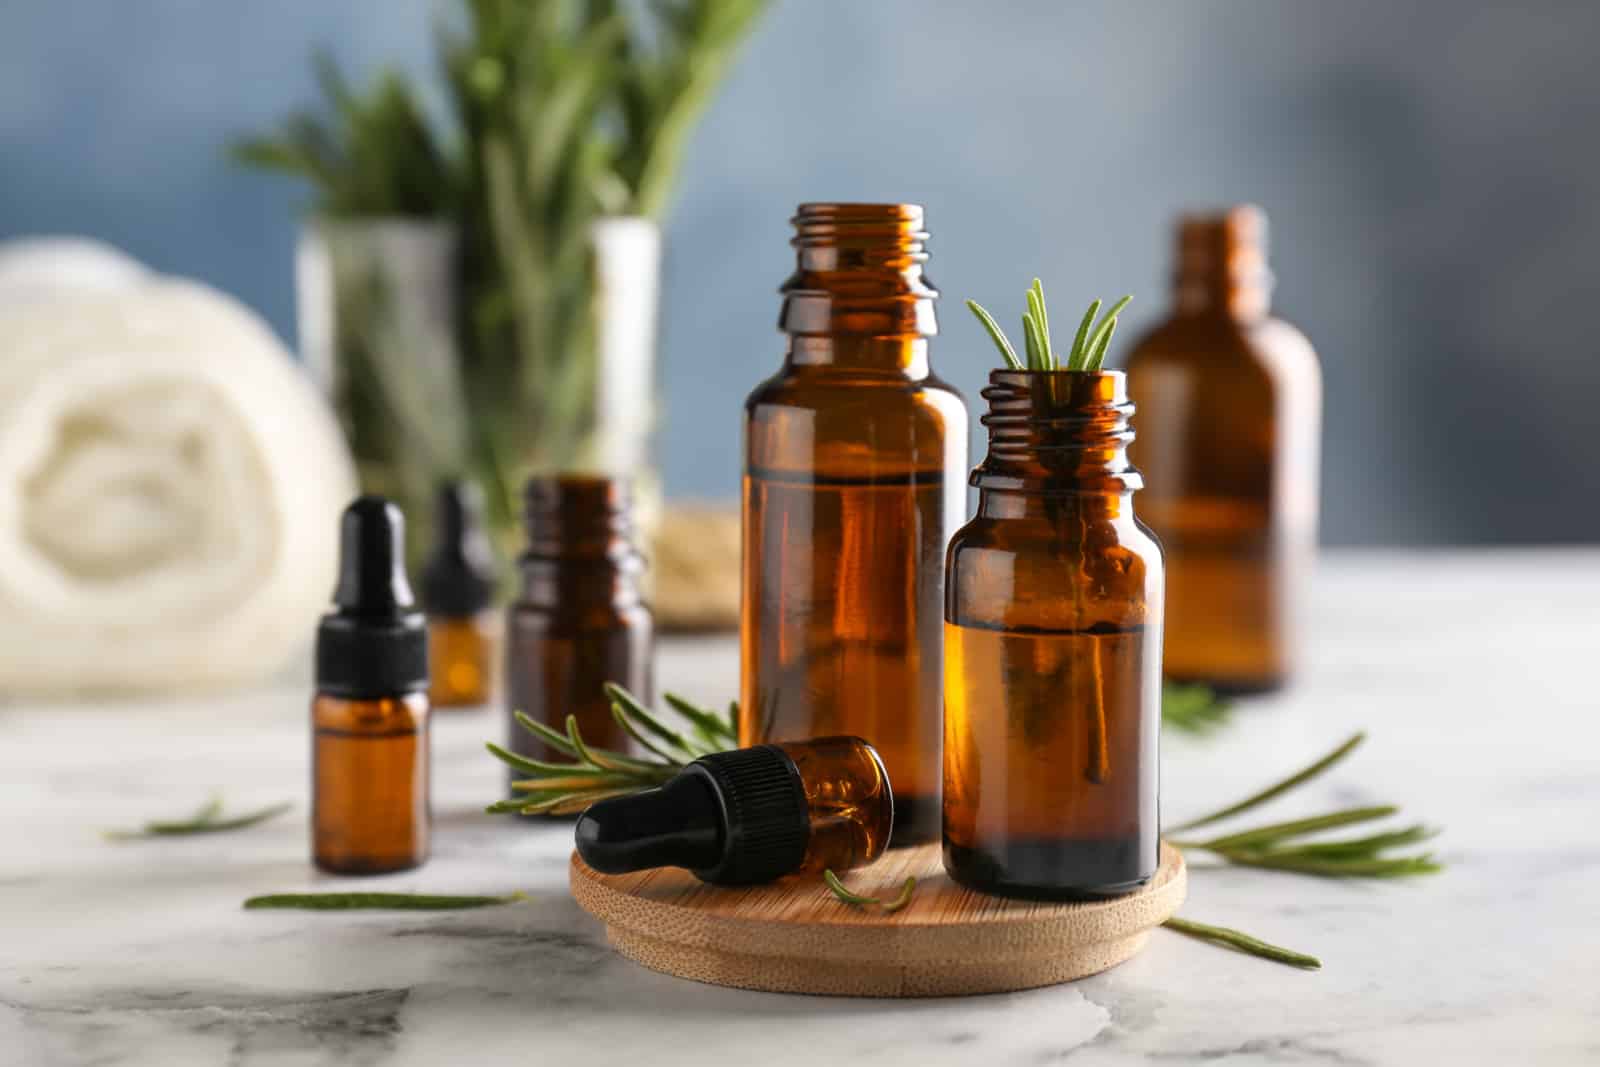 Bottles with rosemary essential oil on table